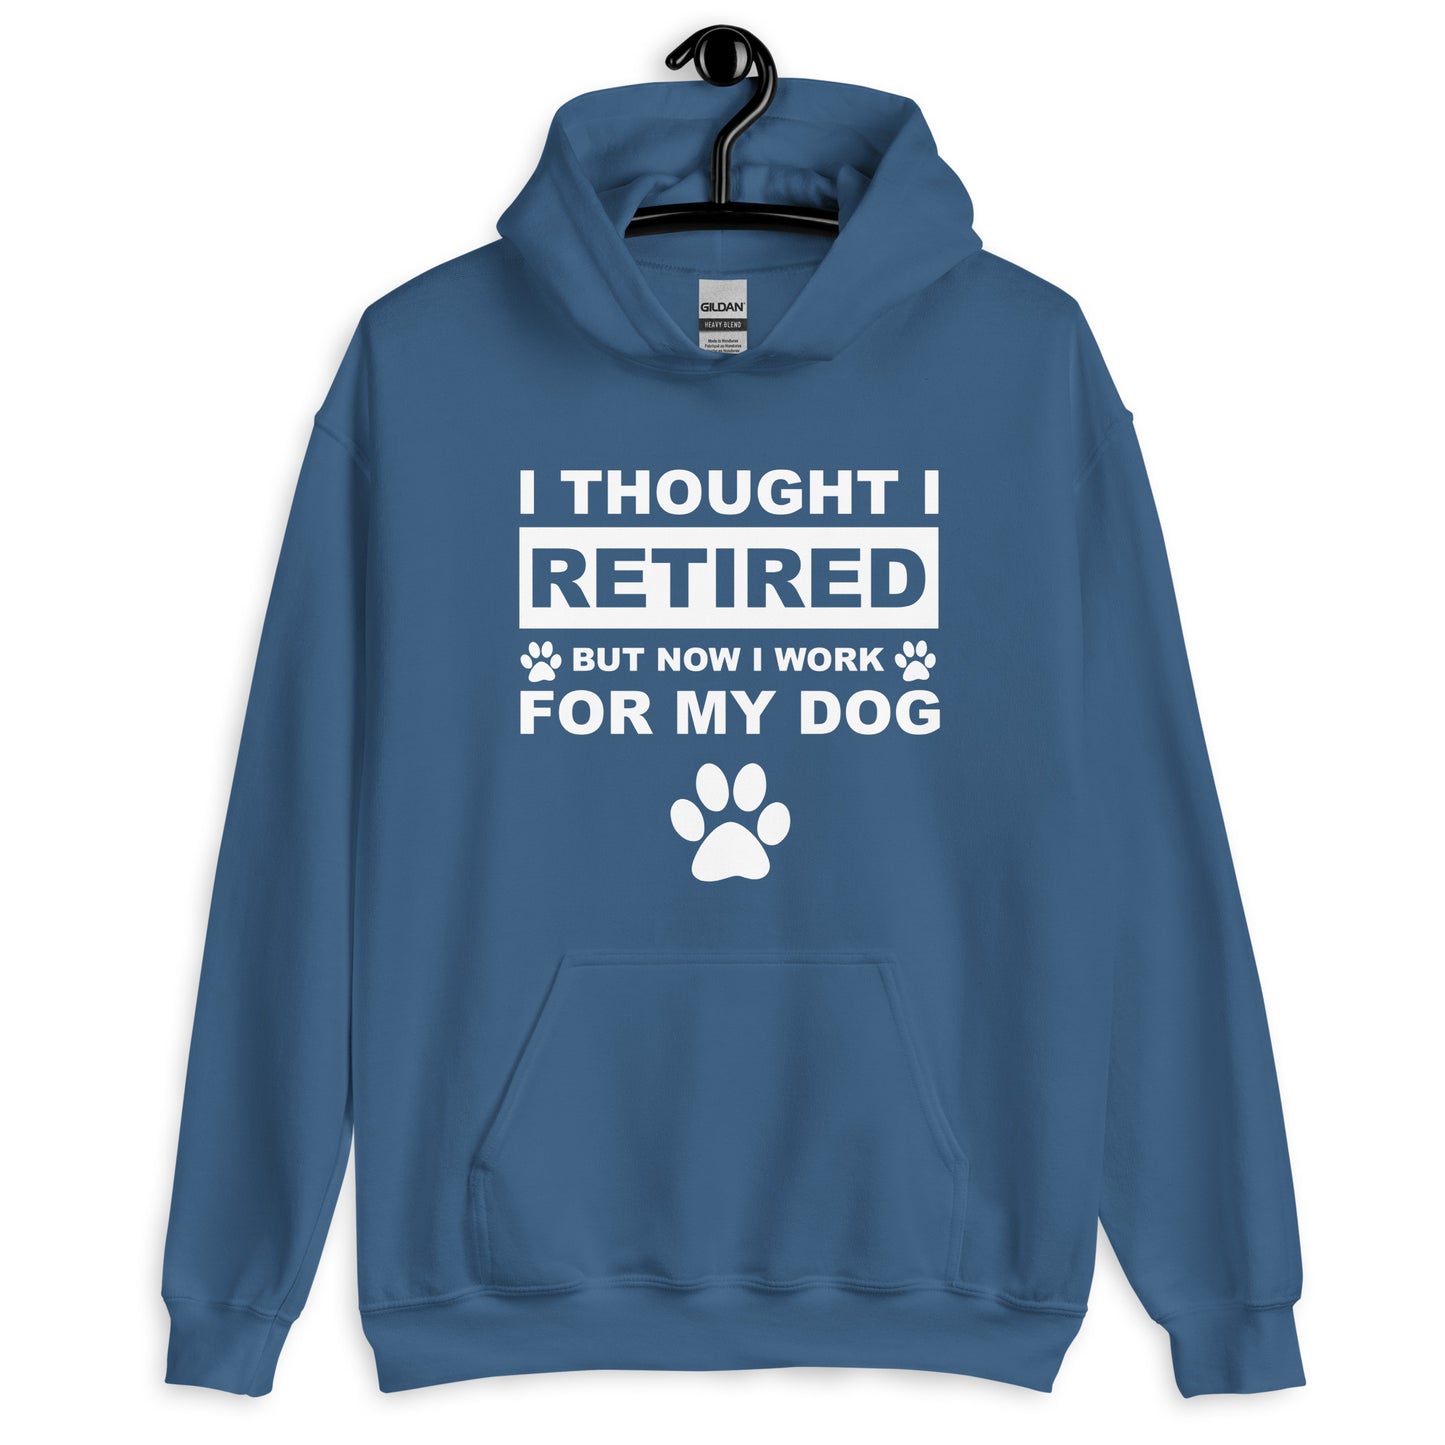 I Thought I Retired But Now I Work for My Dog Hoodie